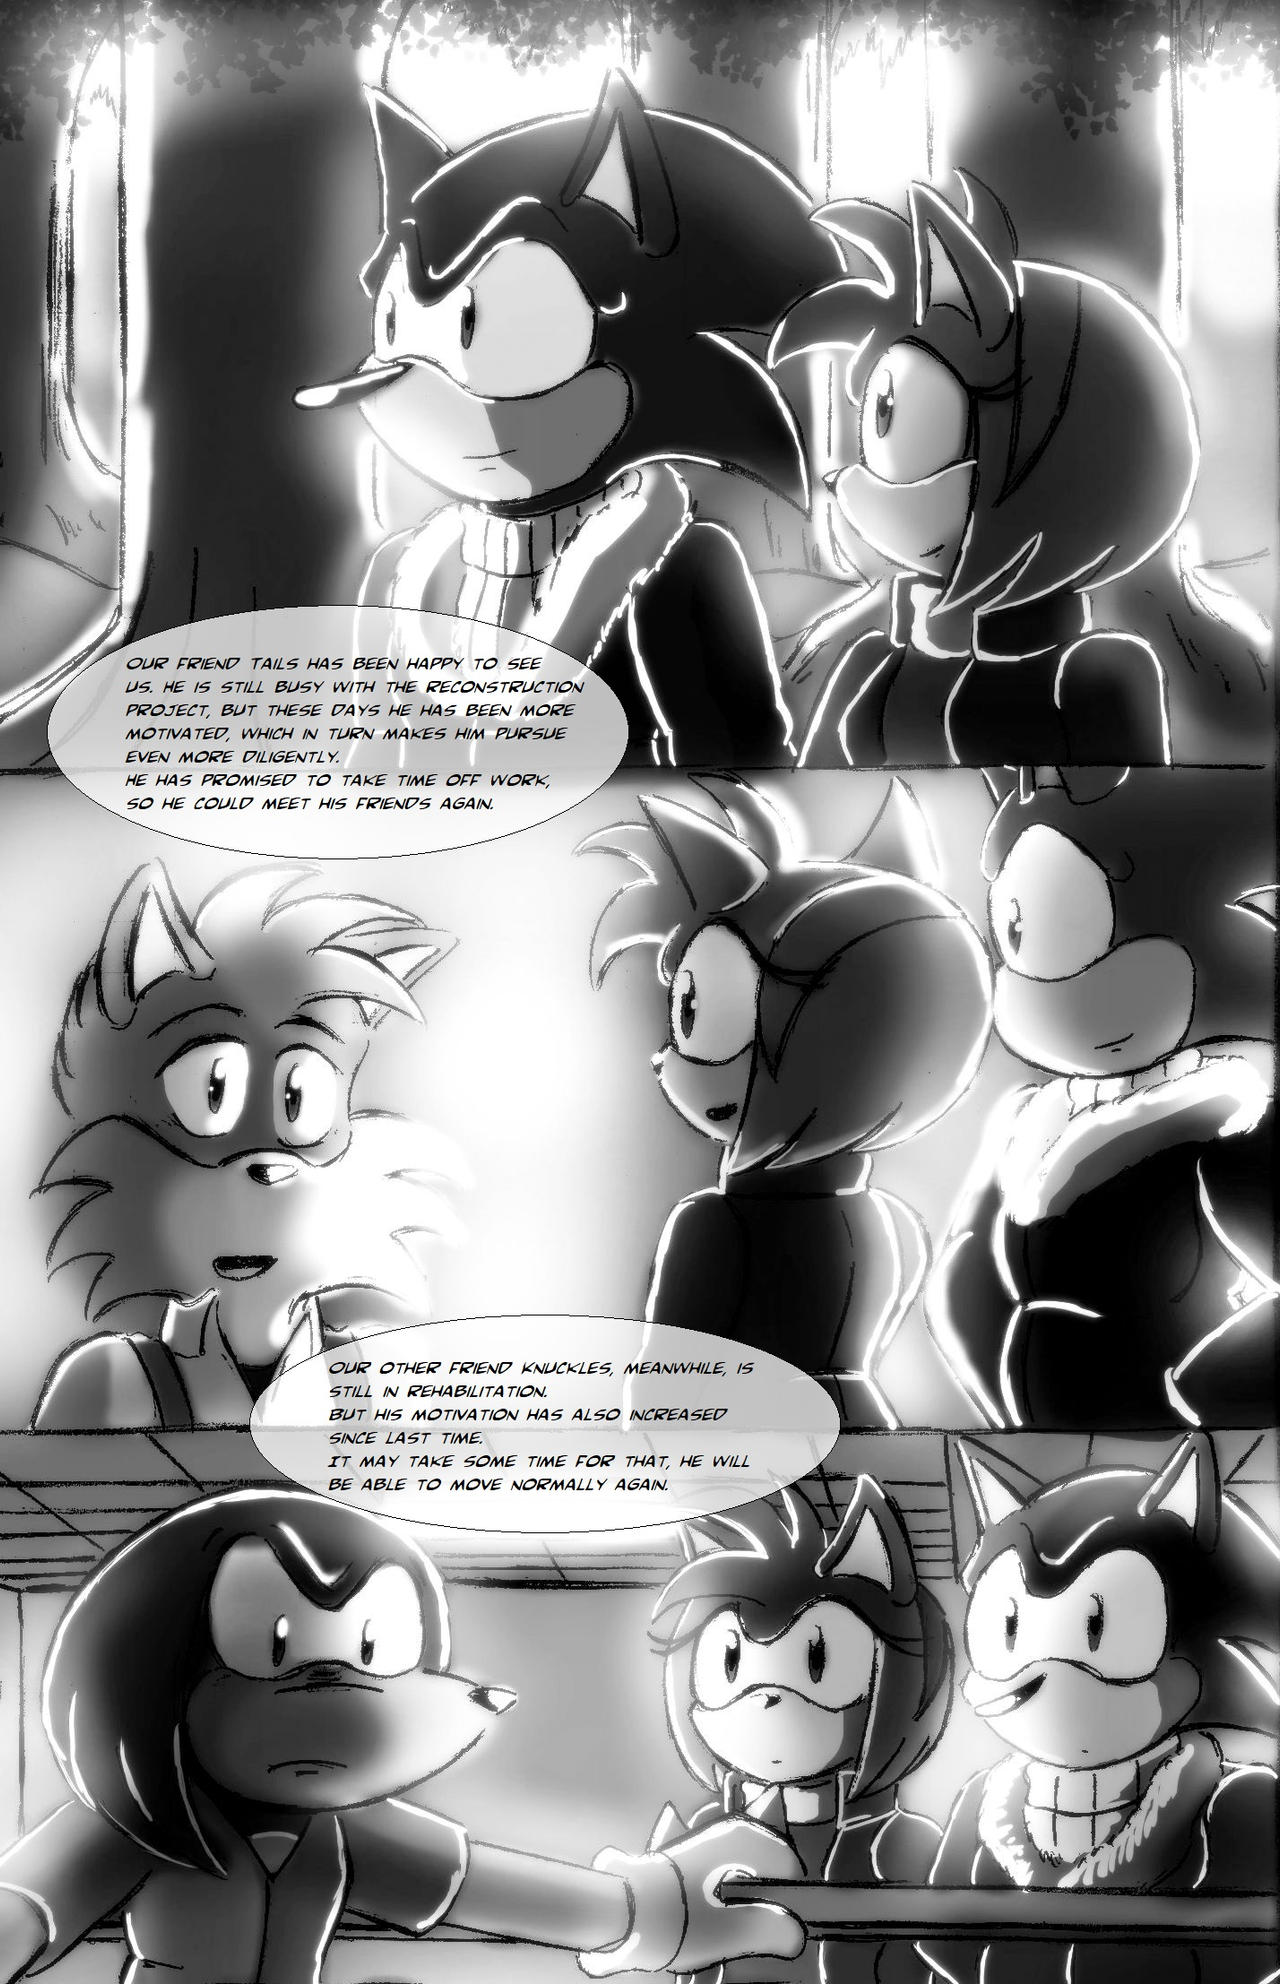 Soul Tails (Sonic 2011) by AnxiousAlex2004 on DeviantArt